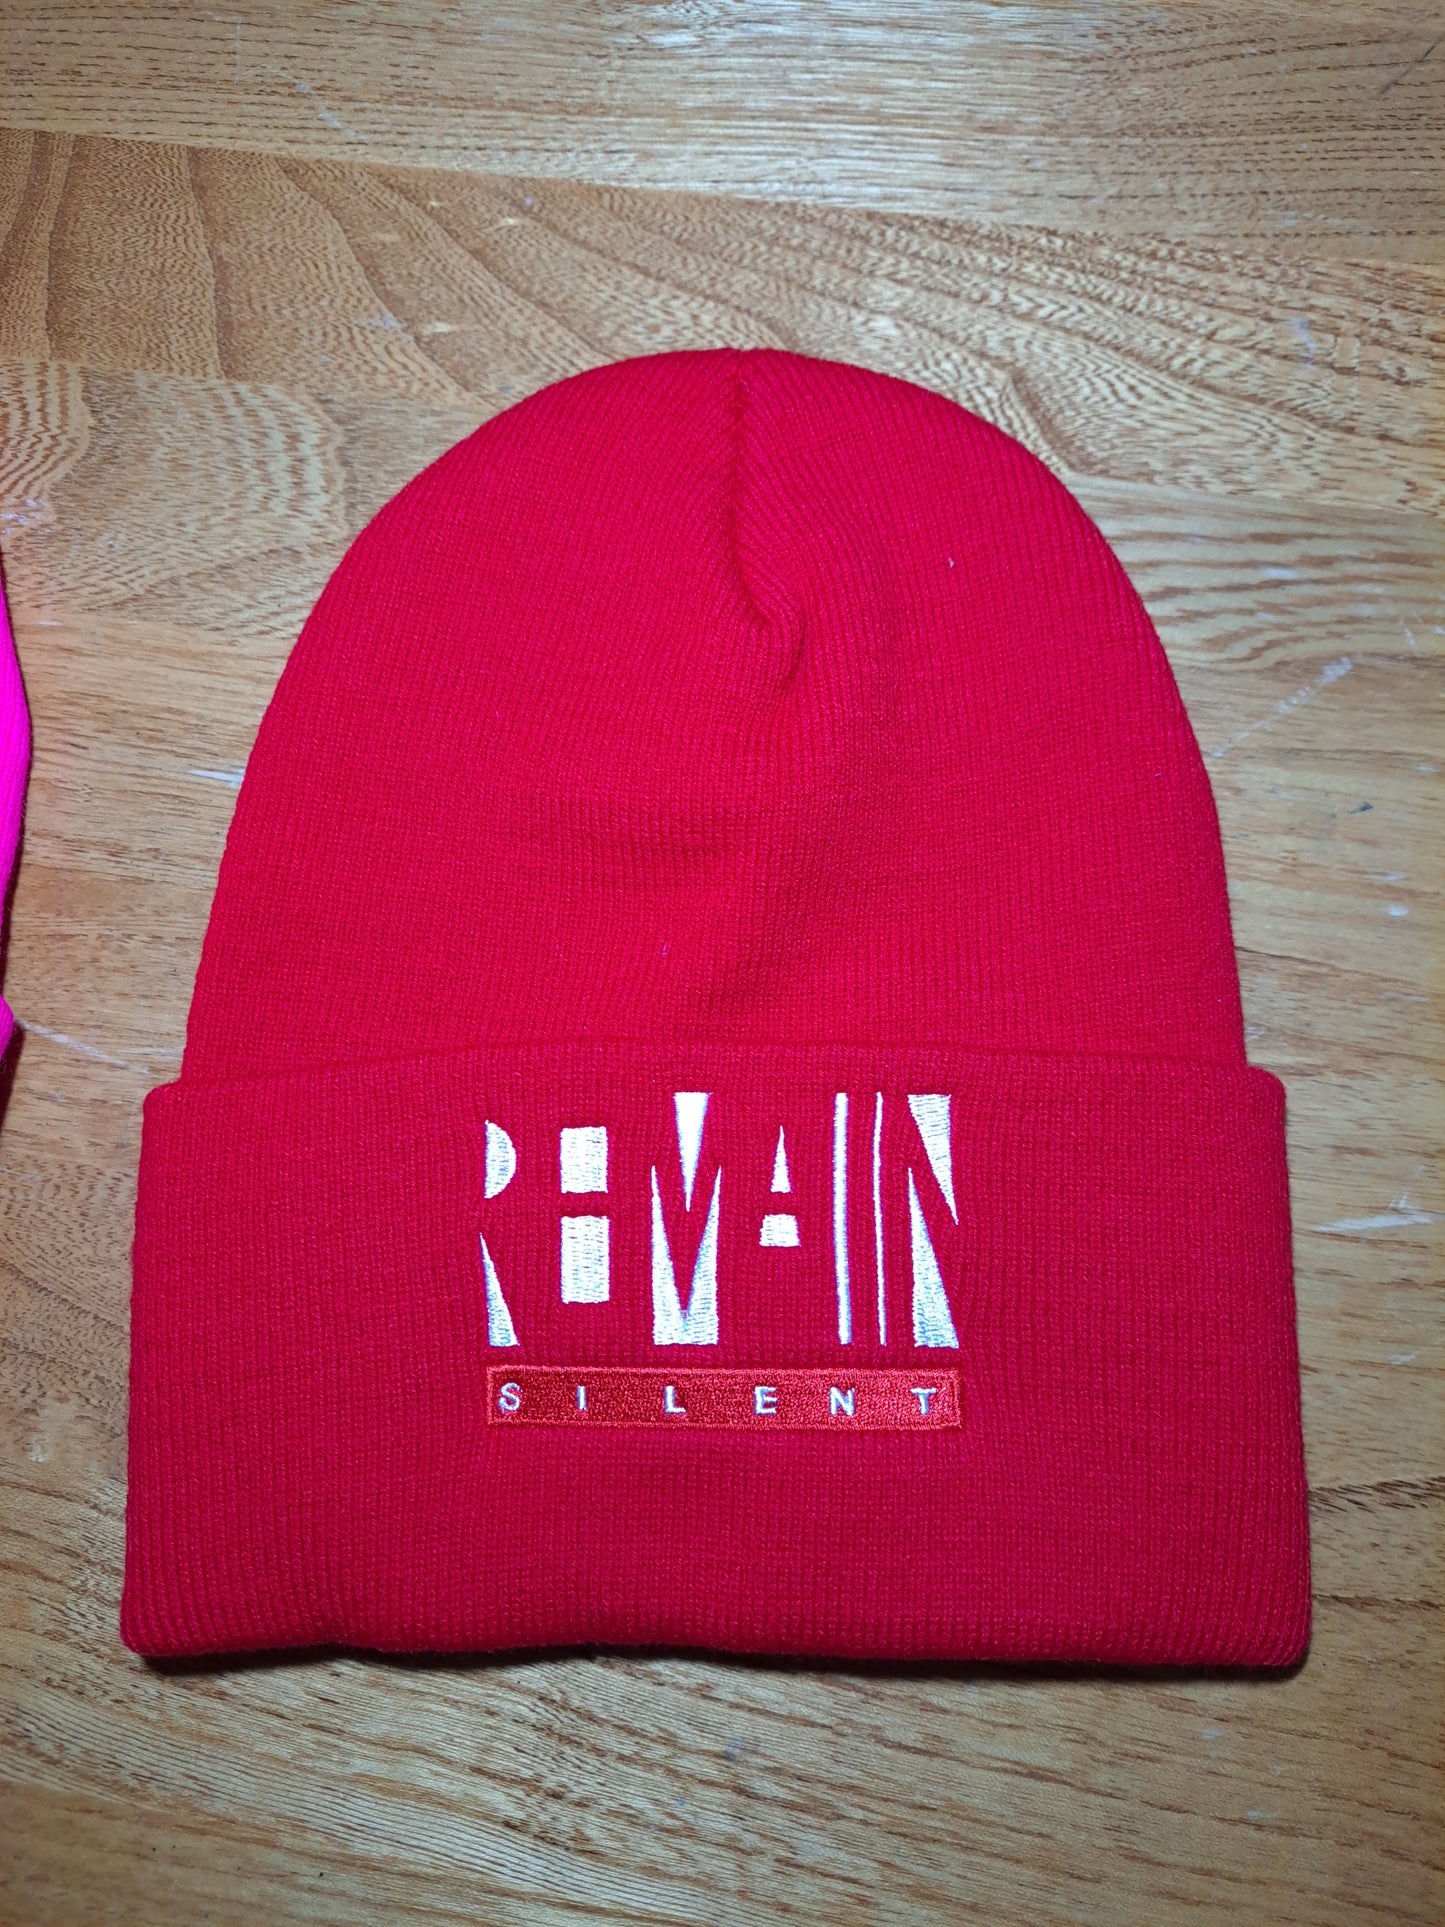 Remain Silent Embroidered Fold Over Stocking Caps